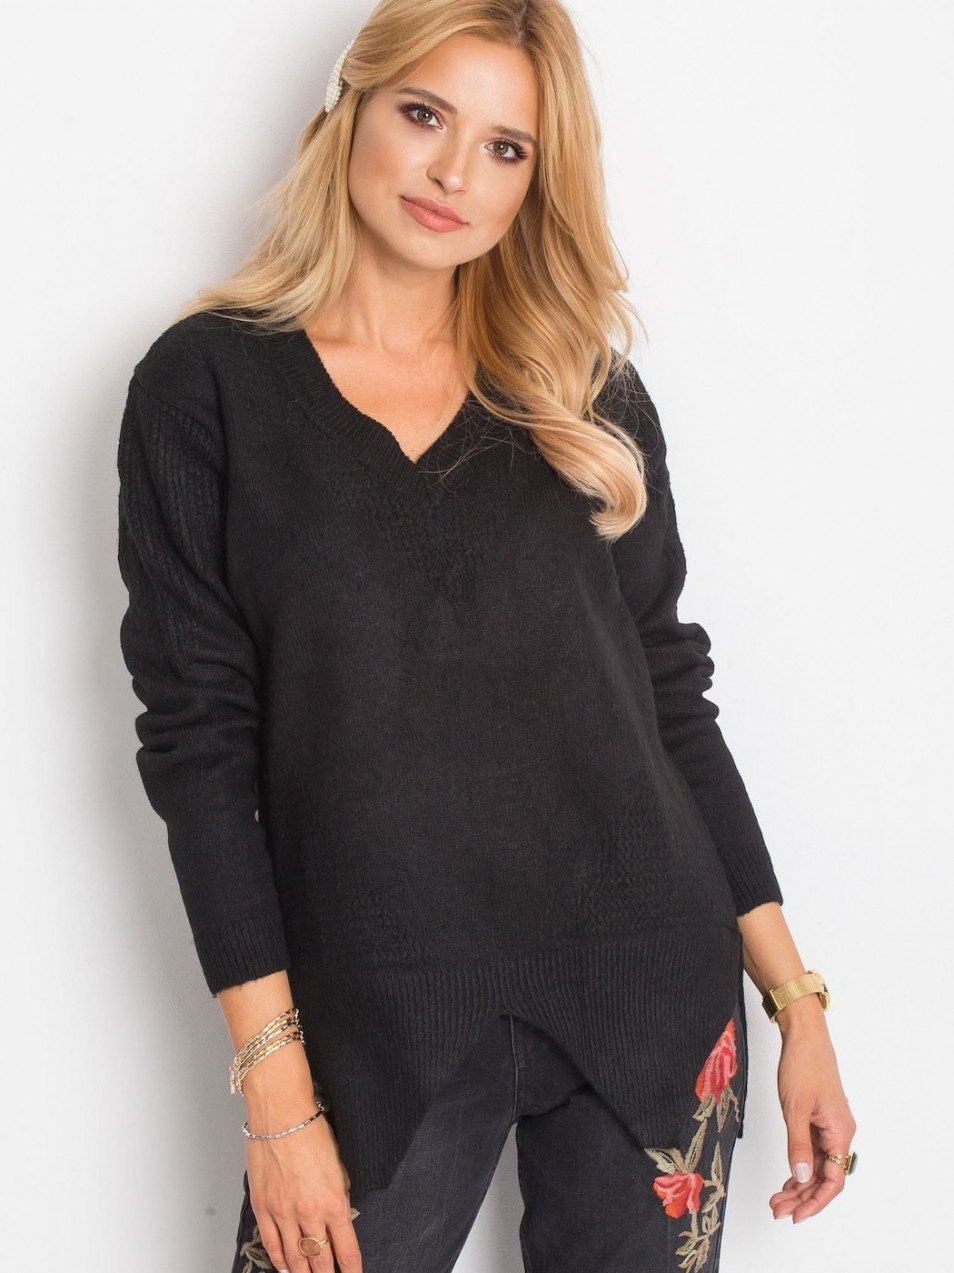 Black sweater with an asymmetrical finish from RUE PARIS